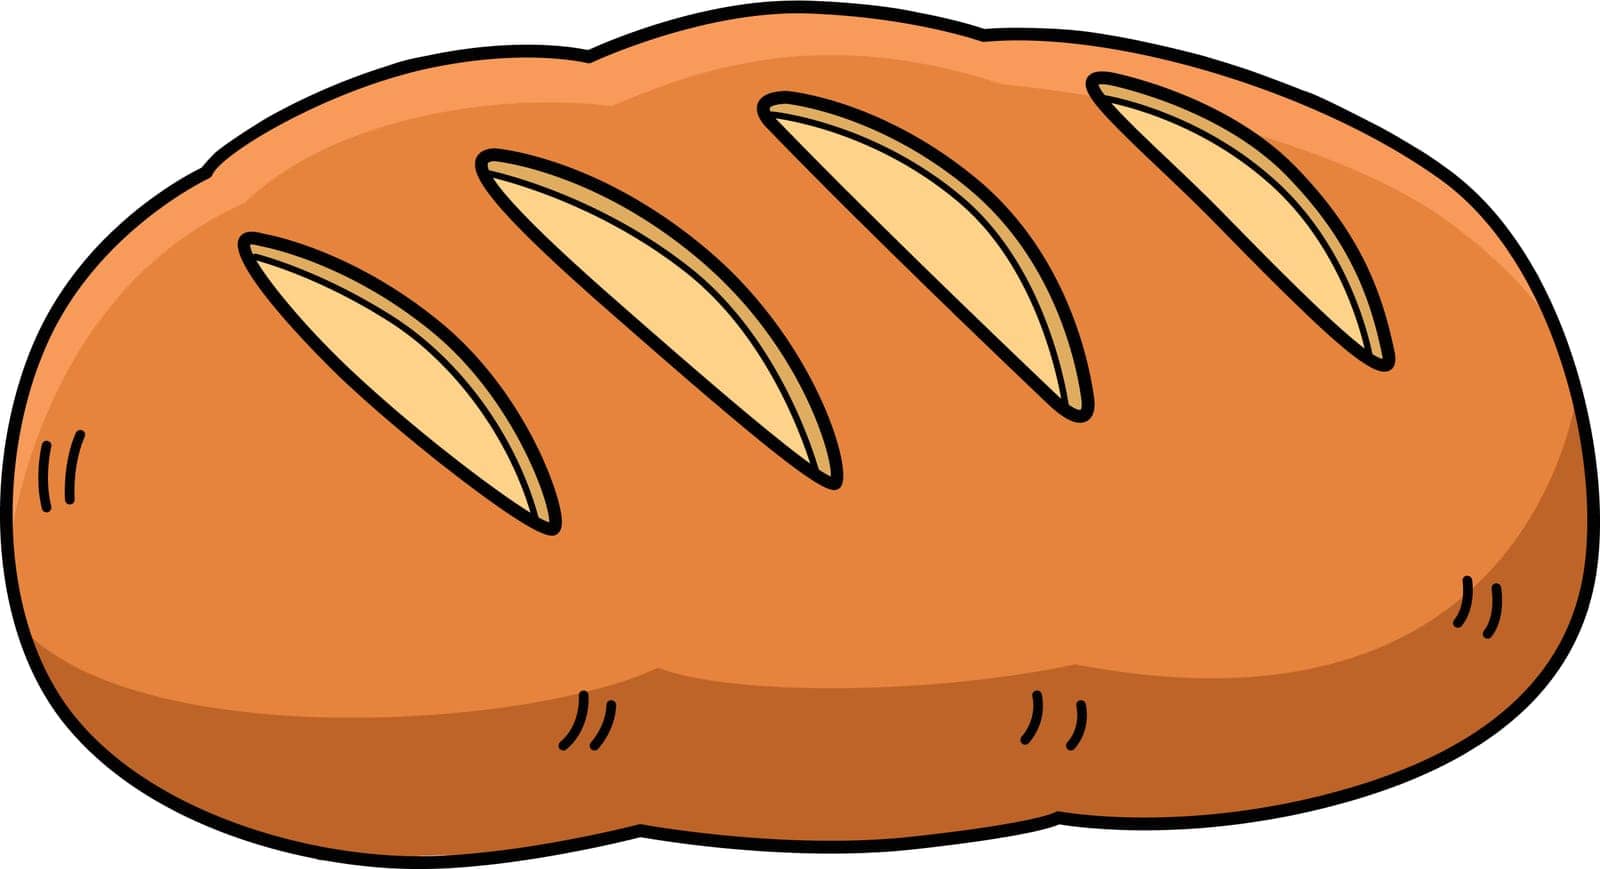 Bread Cartoon Colored Clipart Illustration by abbydesign